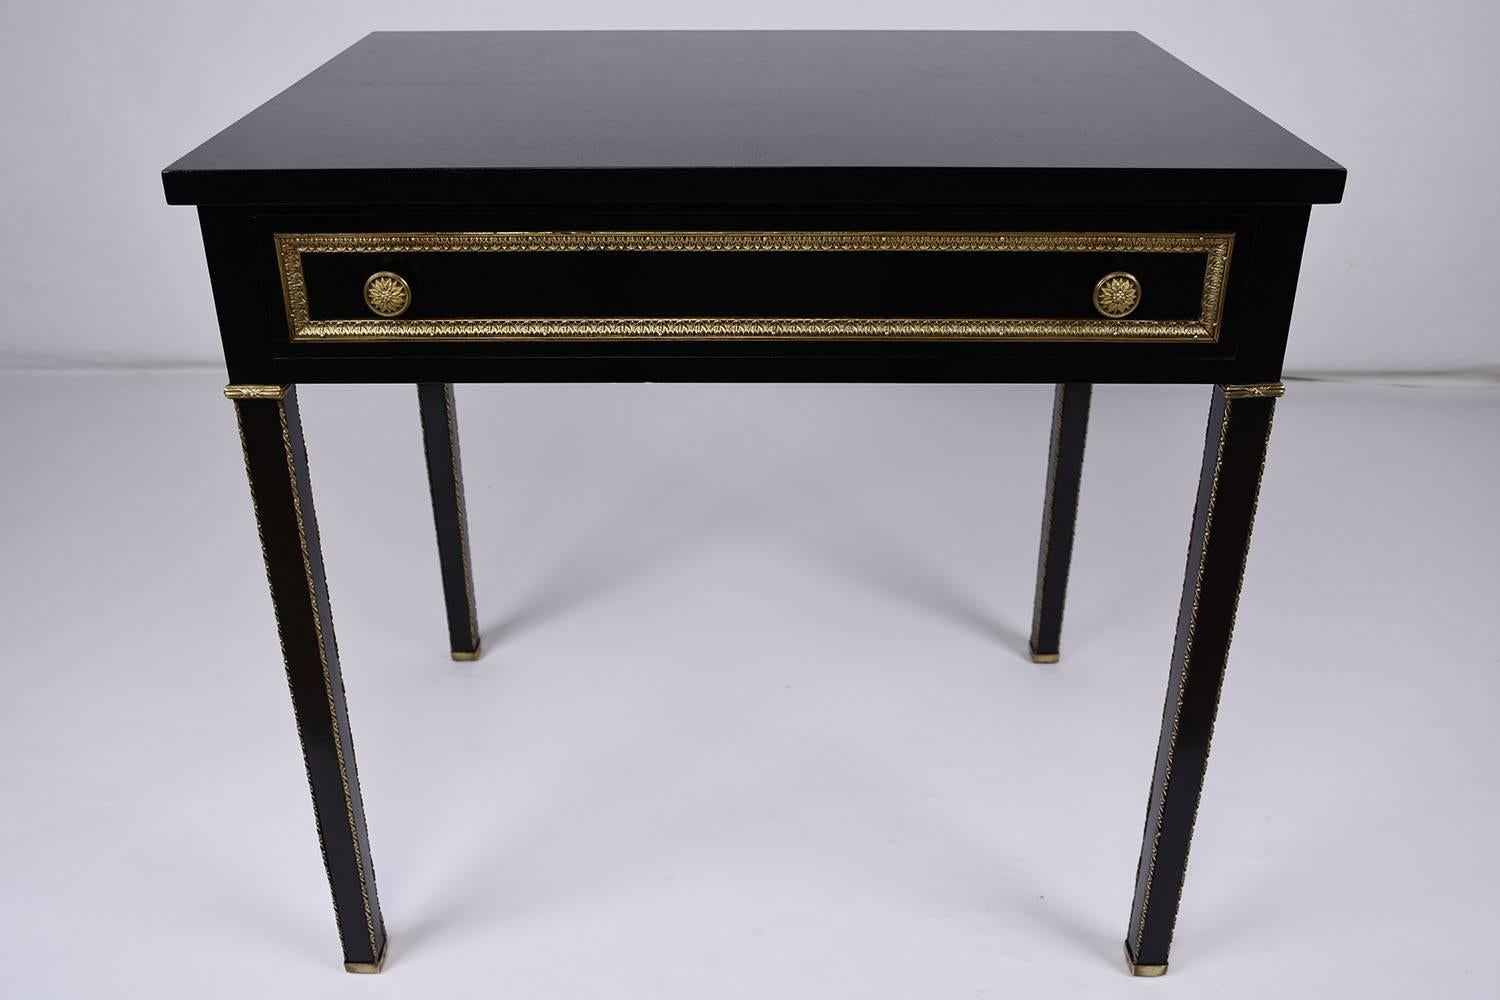 This 1910s antique French Louis XVI-style side table is made of mahogany wood that features a rich, ebonized finish. The single drawer is adorned with bronze moulding details and two decorative drawer pulls. The simple legs are accented by delicate